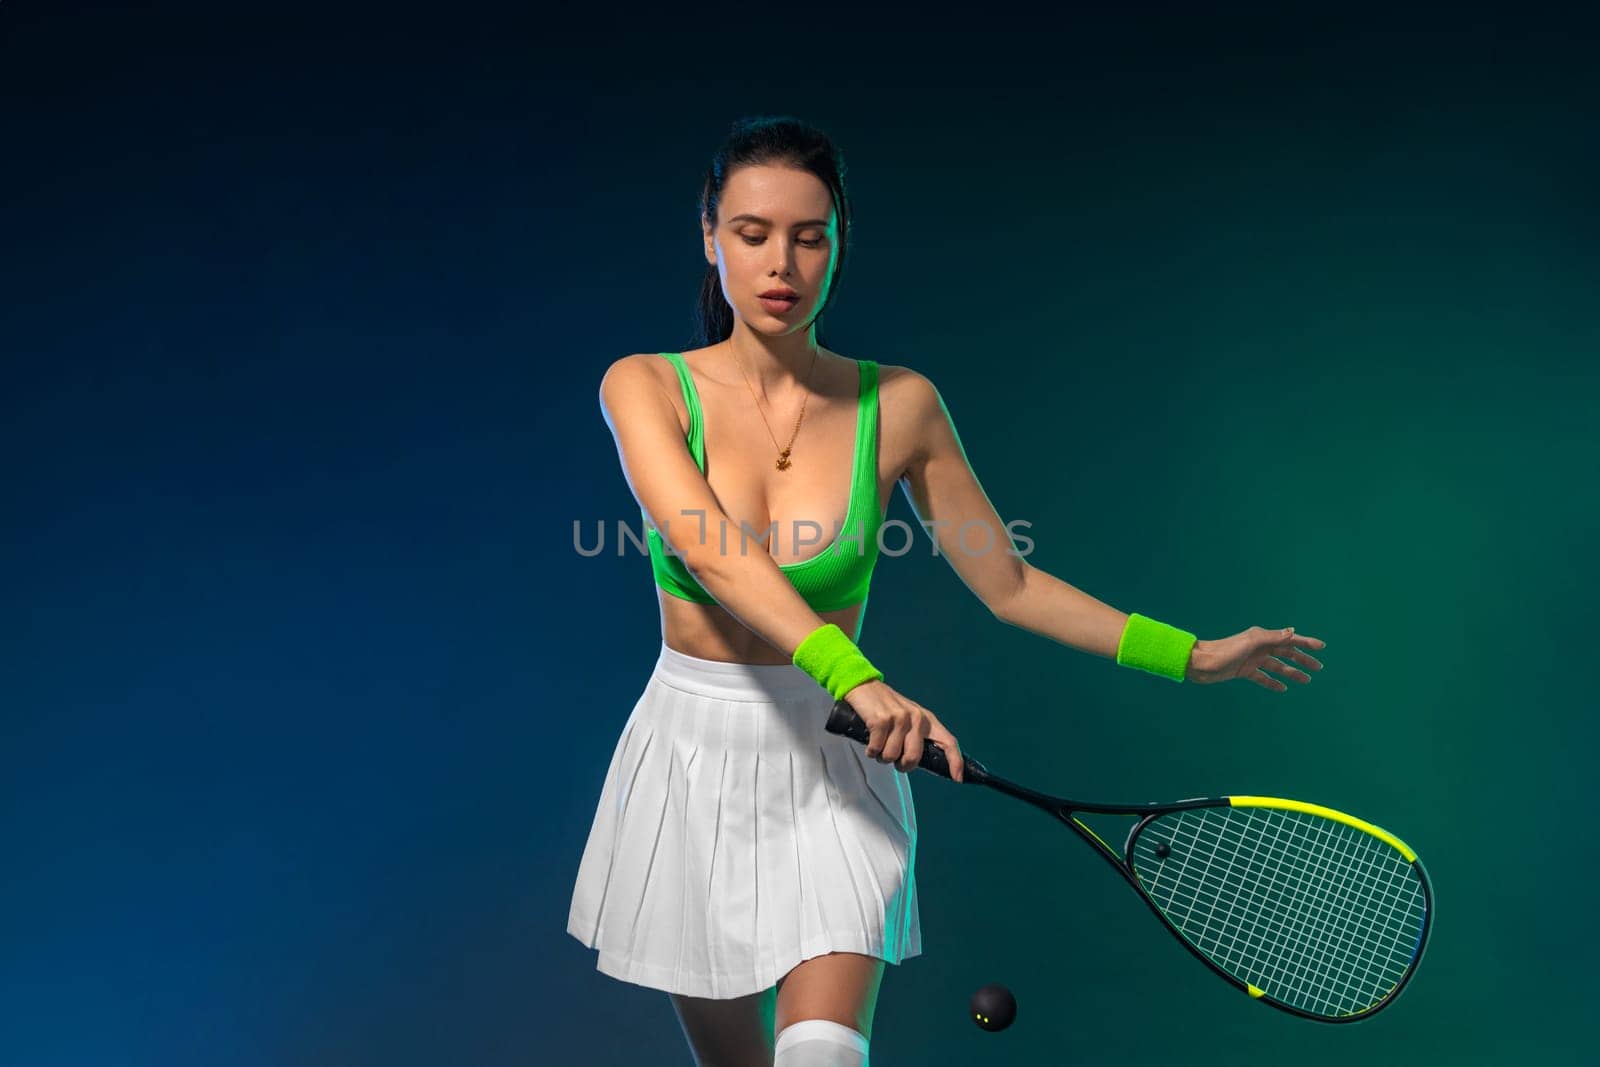 Squash player on a squash court with racket. Man athlete with racket on court with neon colors. Sport concept. Download a high quality photo for the design of a sports app or betting site